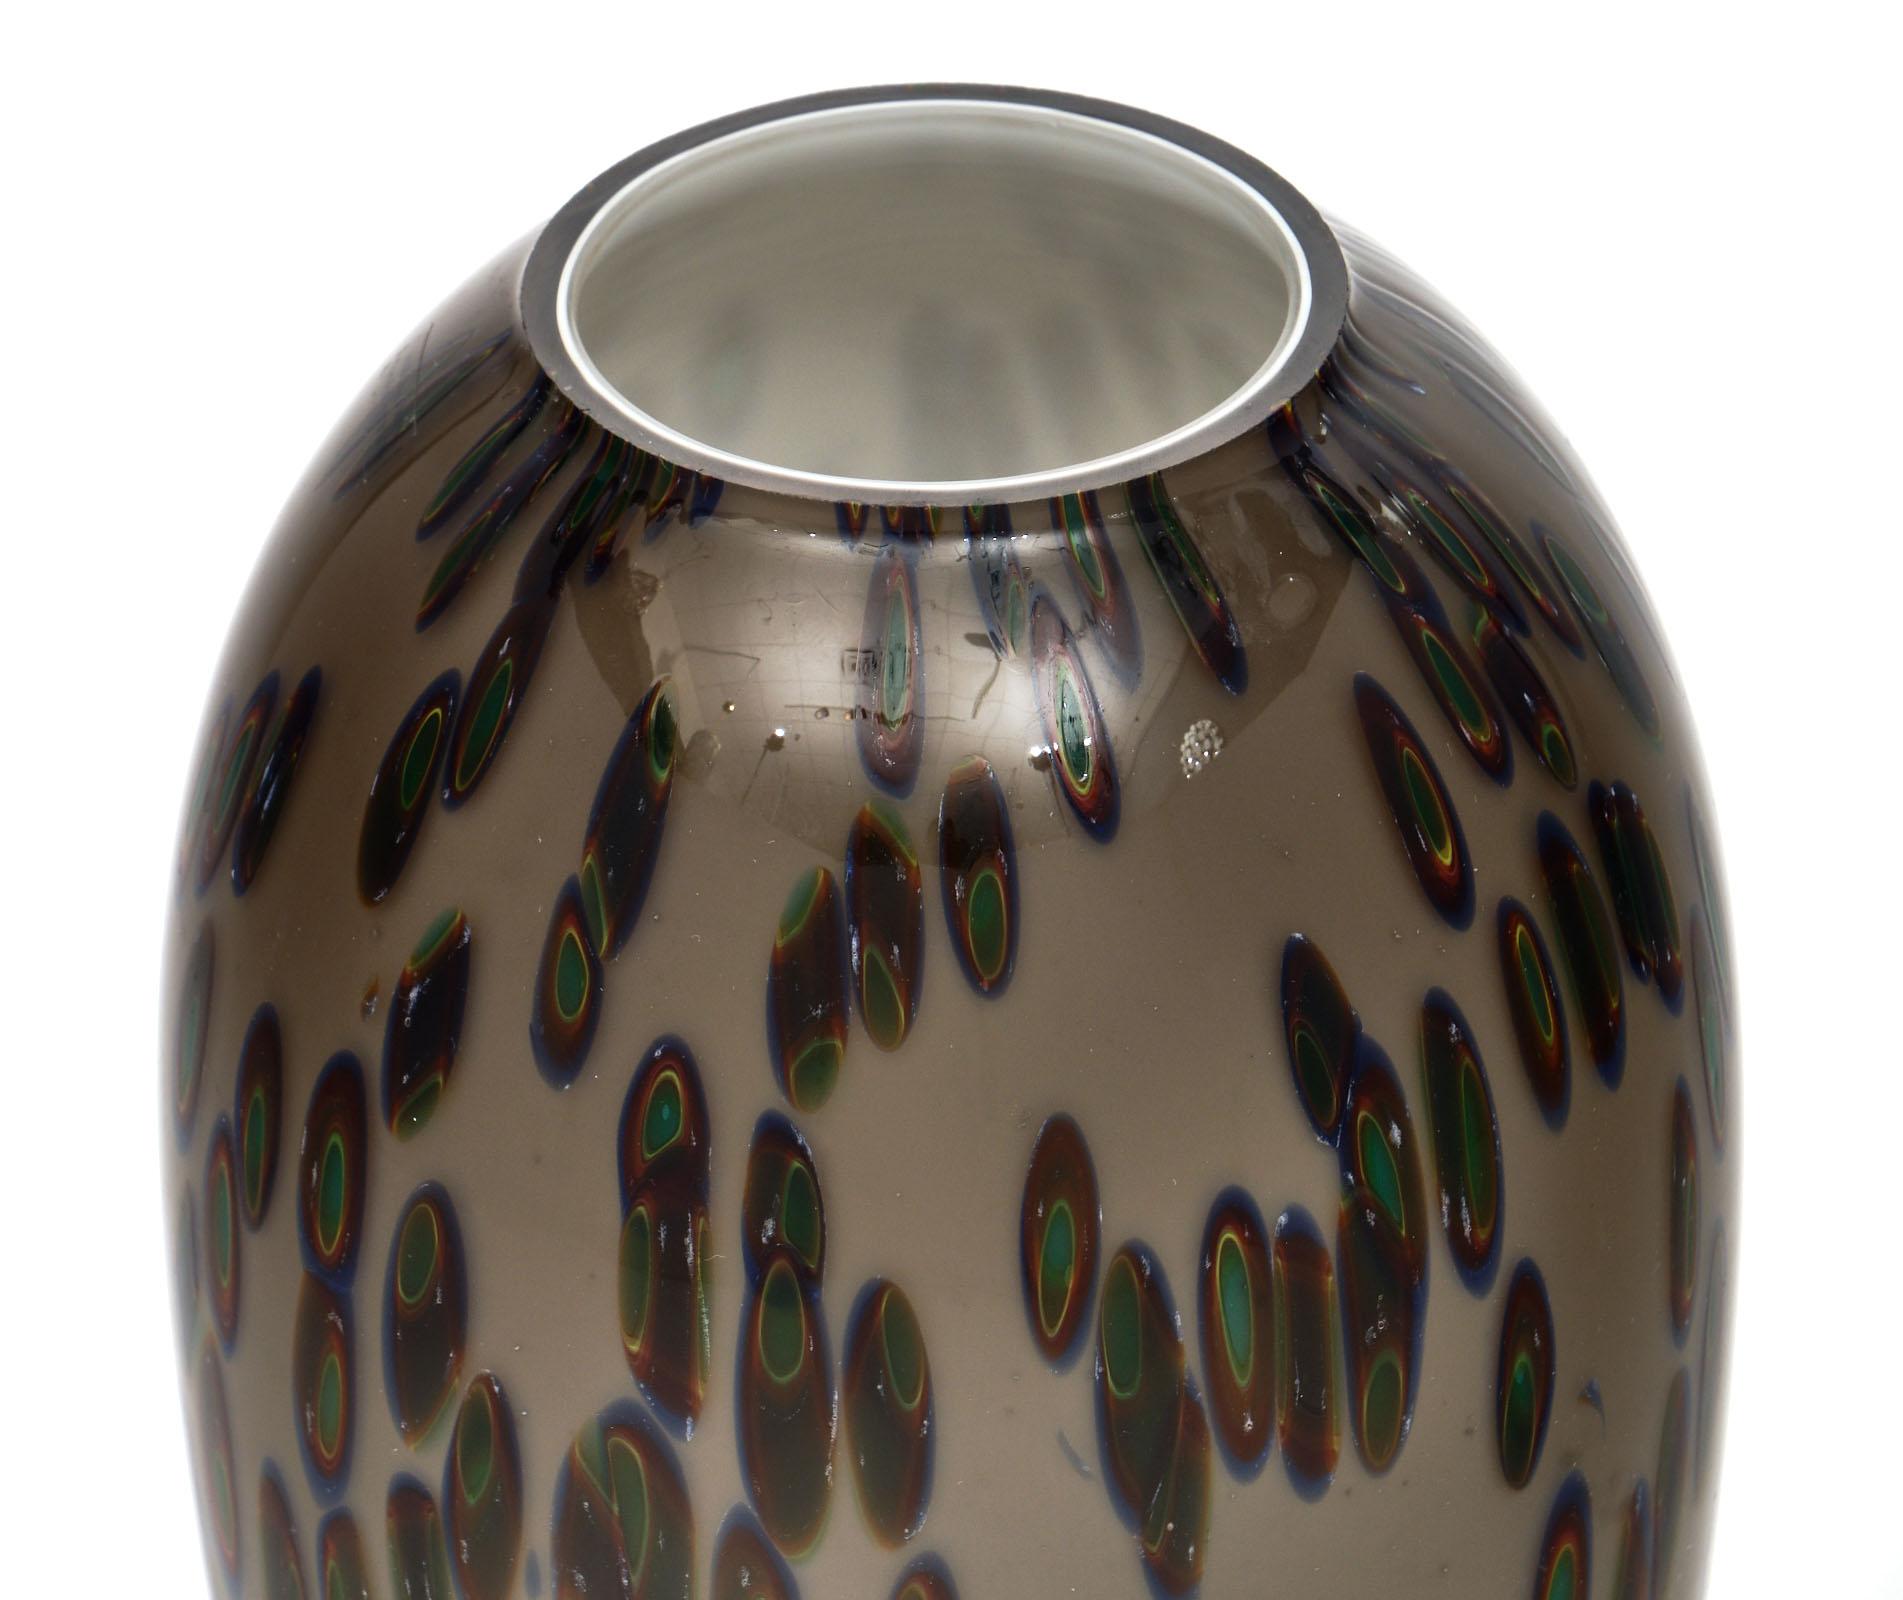 Vintage Murano glass “murrine” vase made by artisans in Italy. This hand blown piece of art features the “murrine” technique - colorful images made in glass cane that are revealed when the cane us cut into cross sections. The vase is then finished